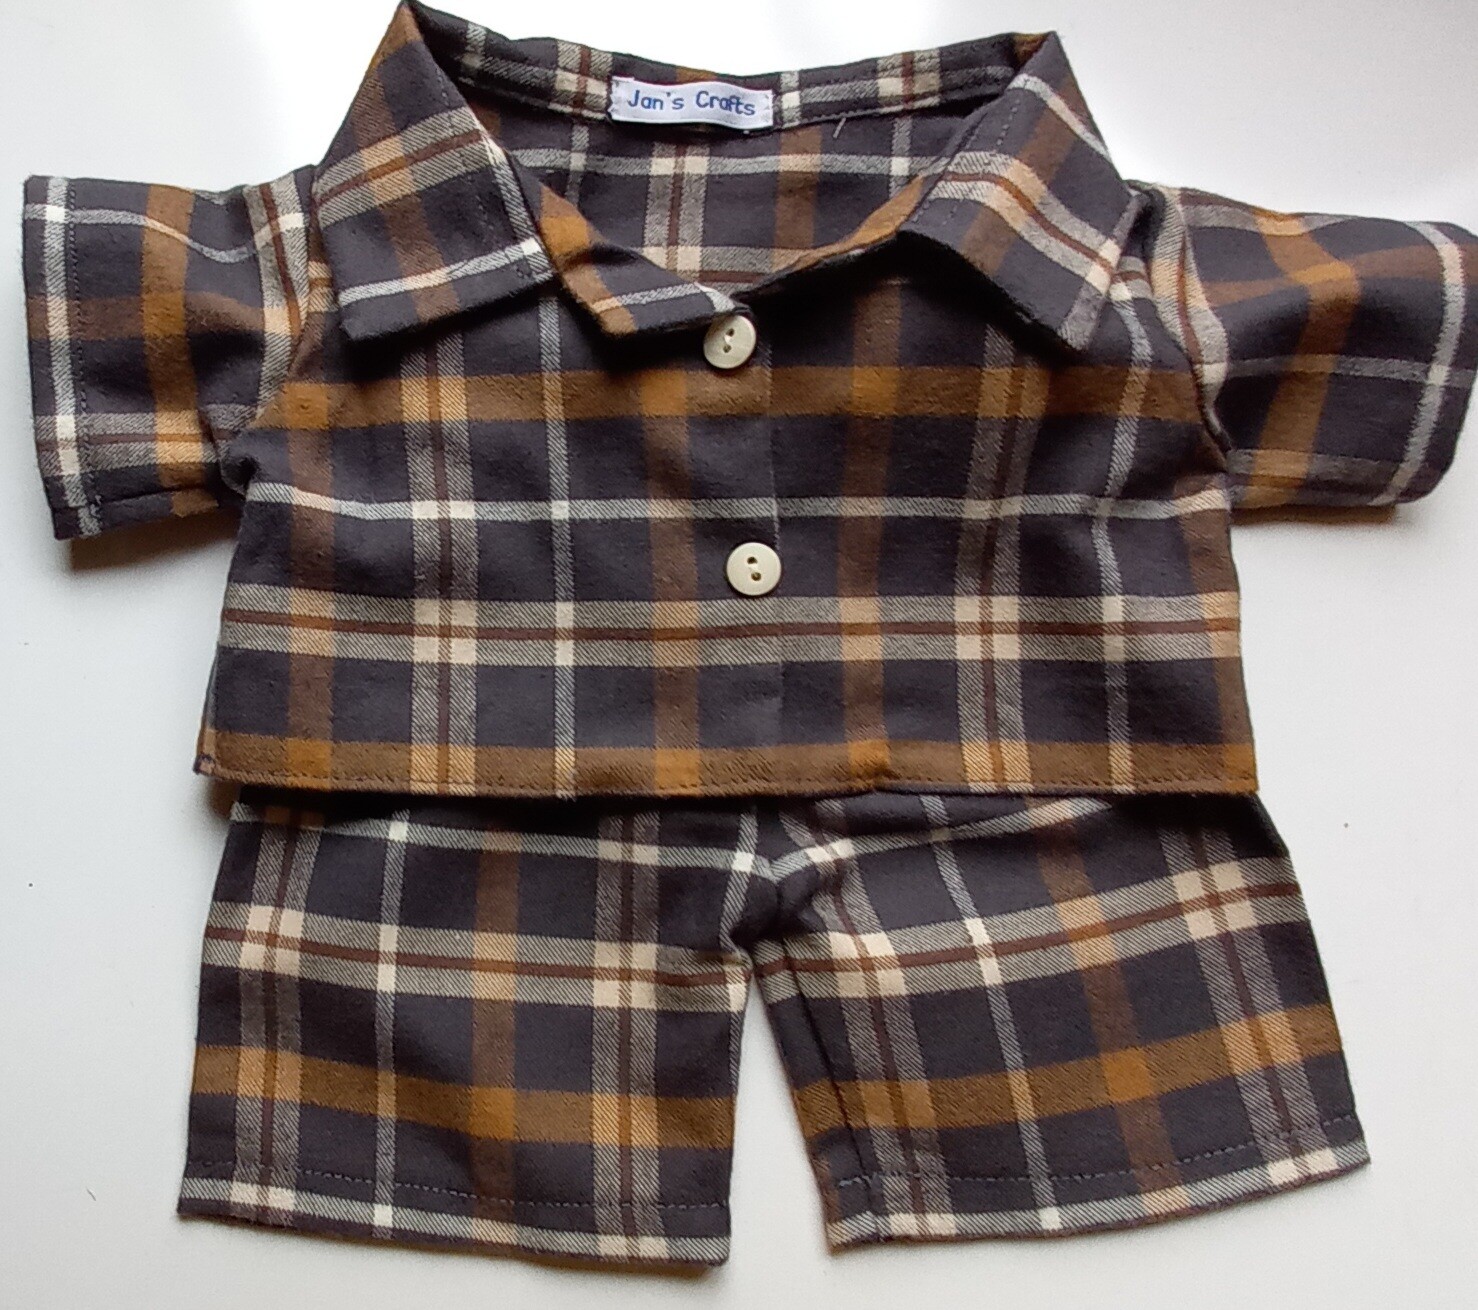 Pyjamas with collar - brushed cotton in a grey check